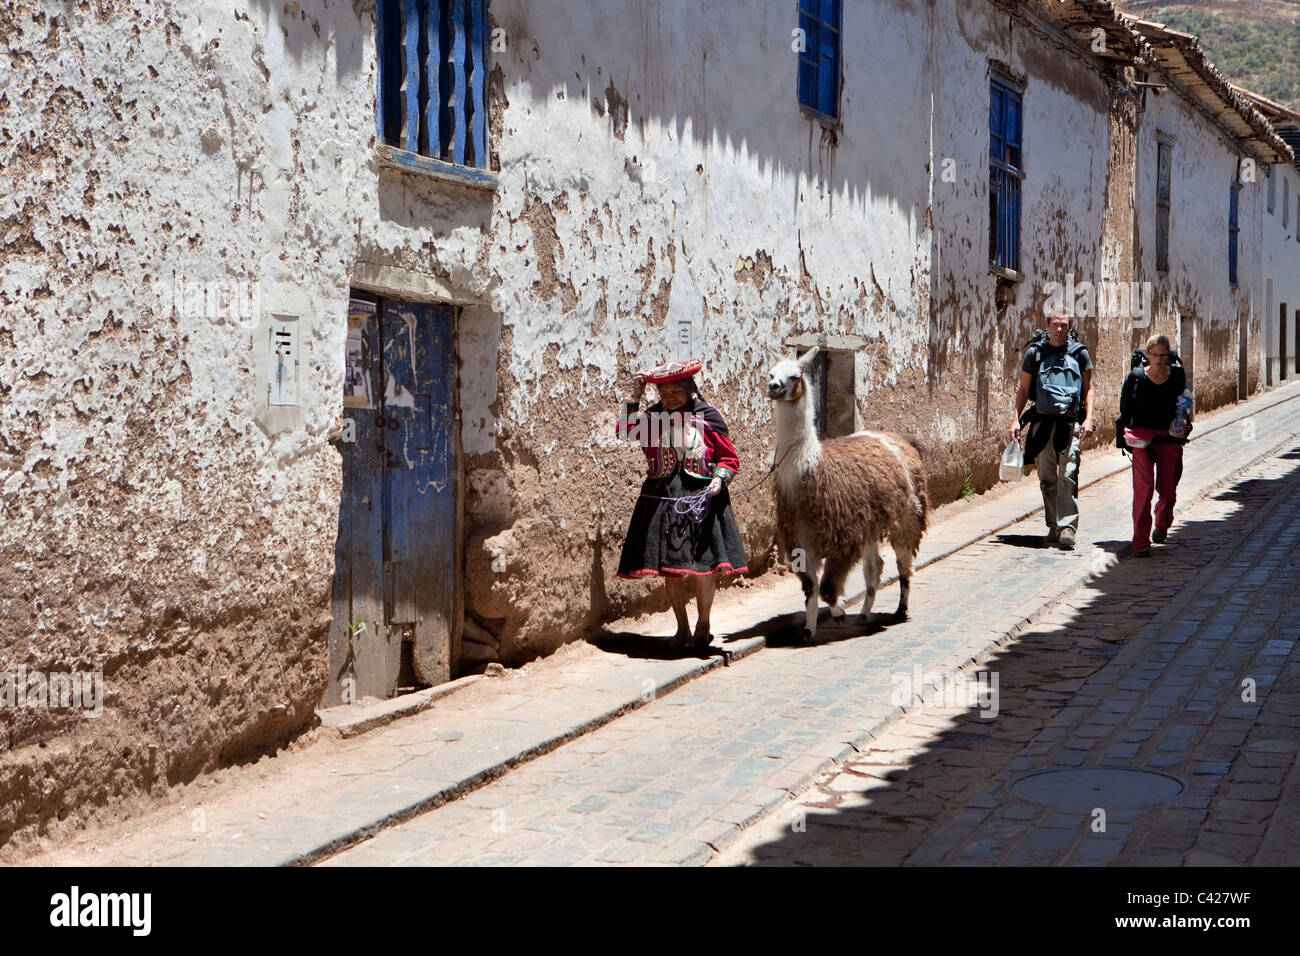 Peru, Cusco, Cuzco, Old Indian woman with llama and backpacker couple in San Blas district. UNESCO World Heritage Site. Stock Photo